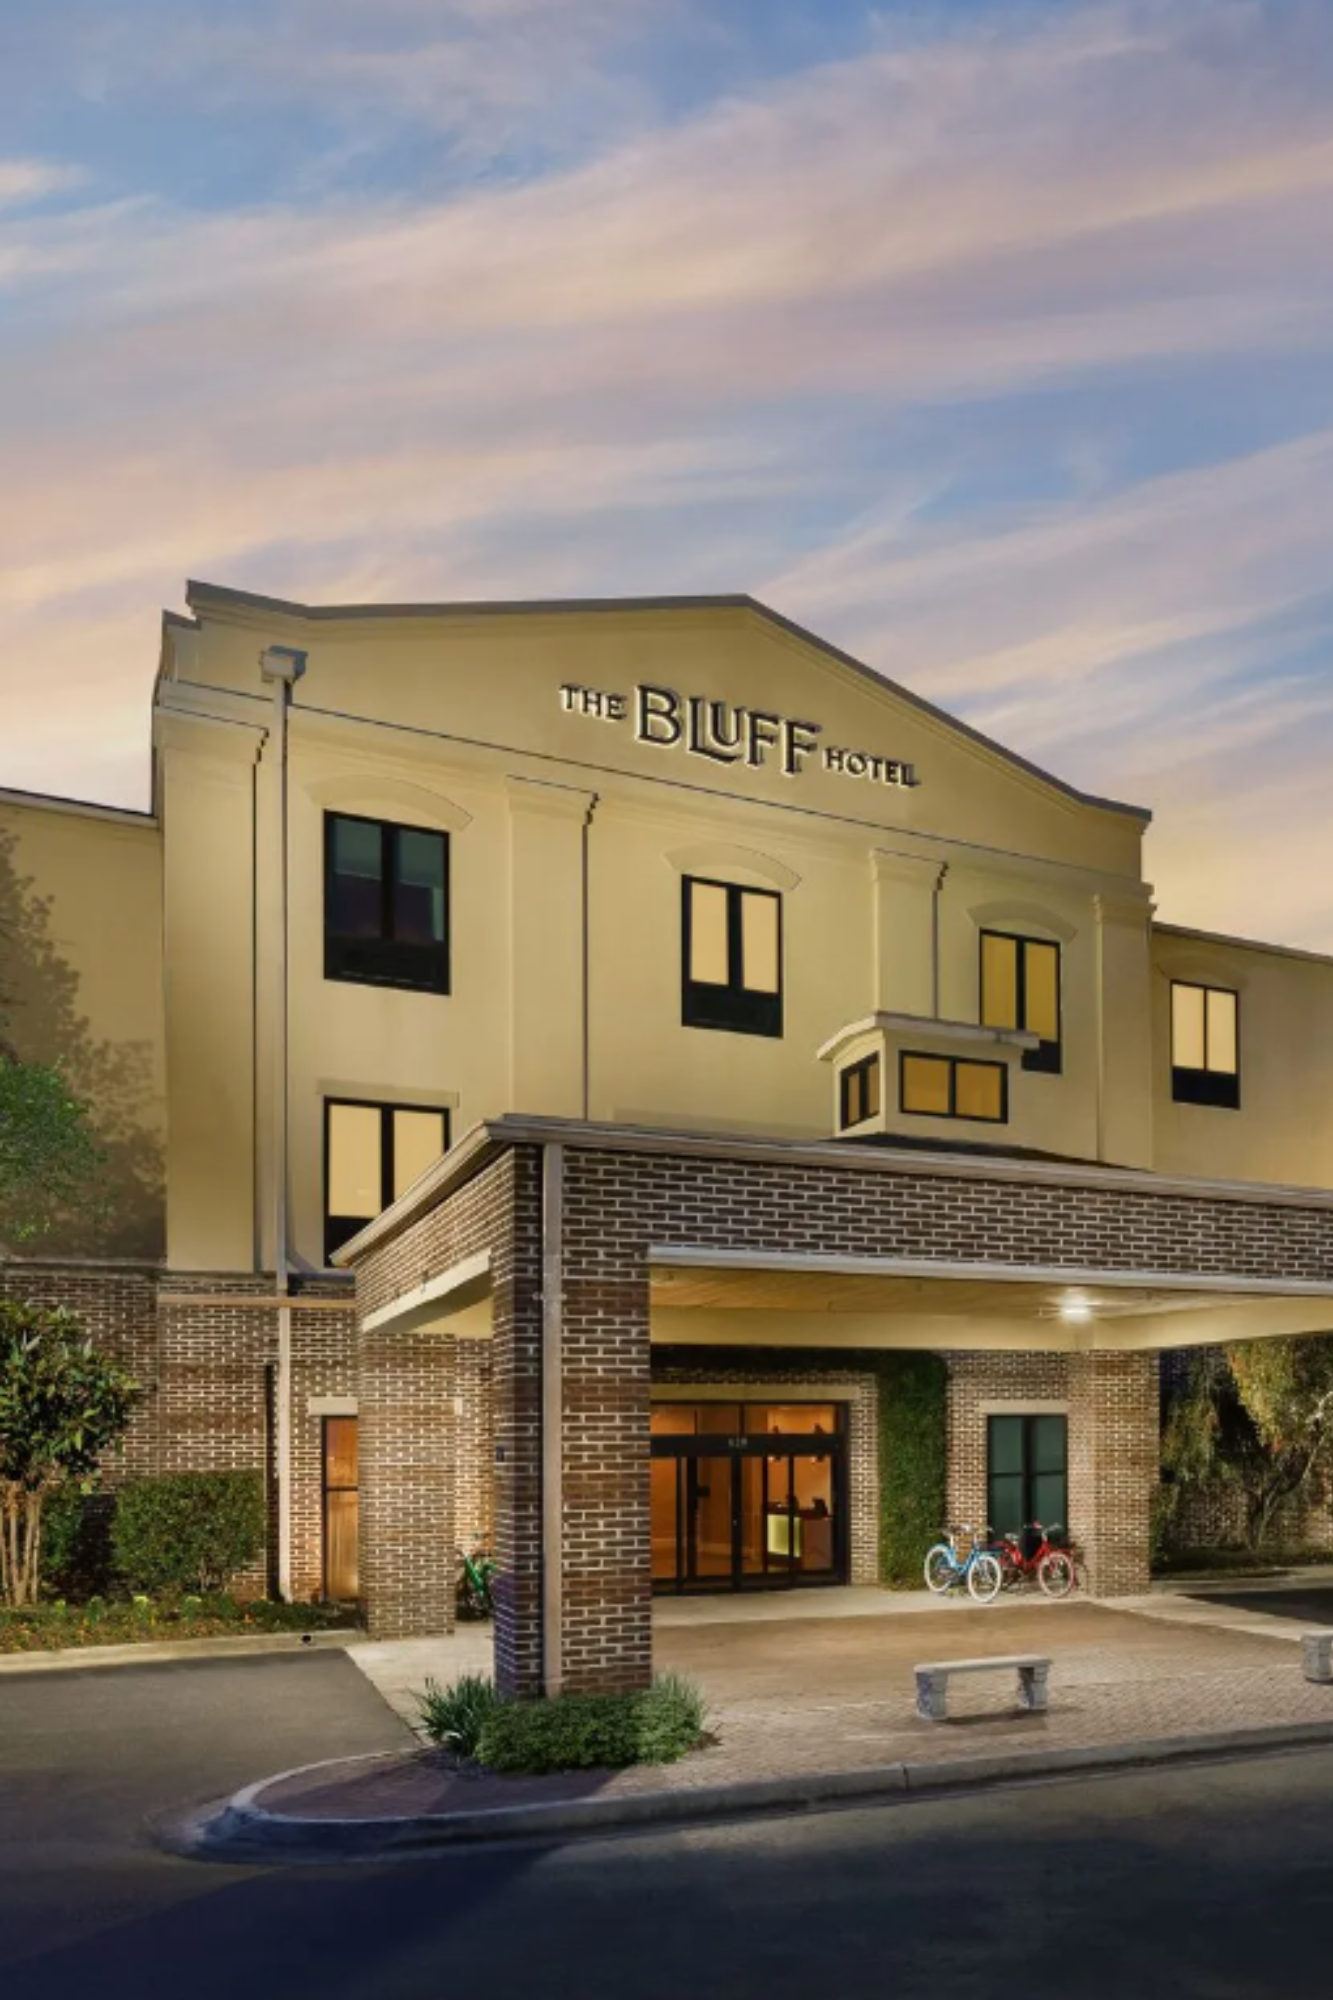 The Bluff Hotel exterior